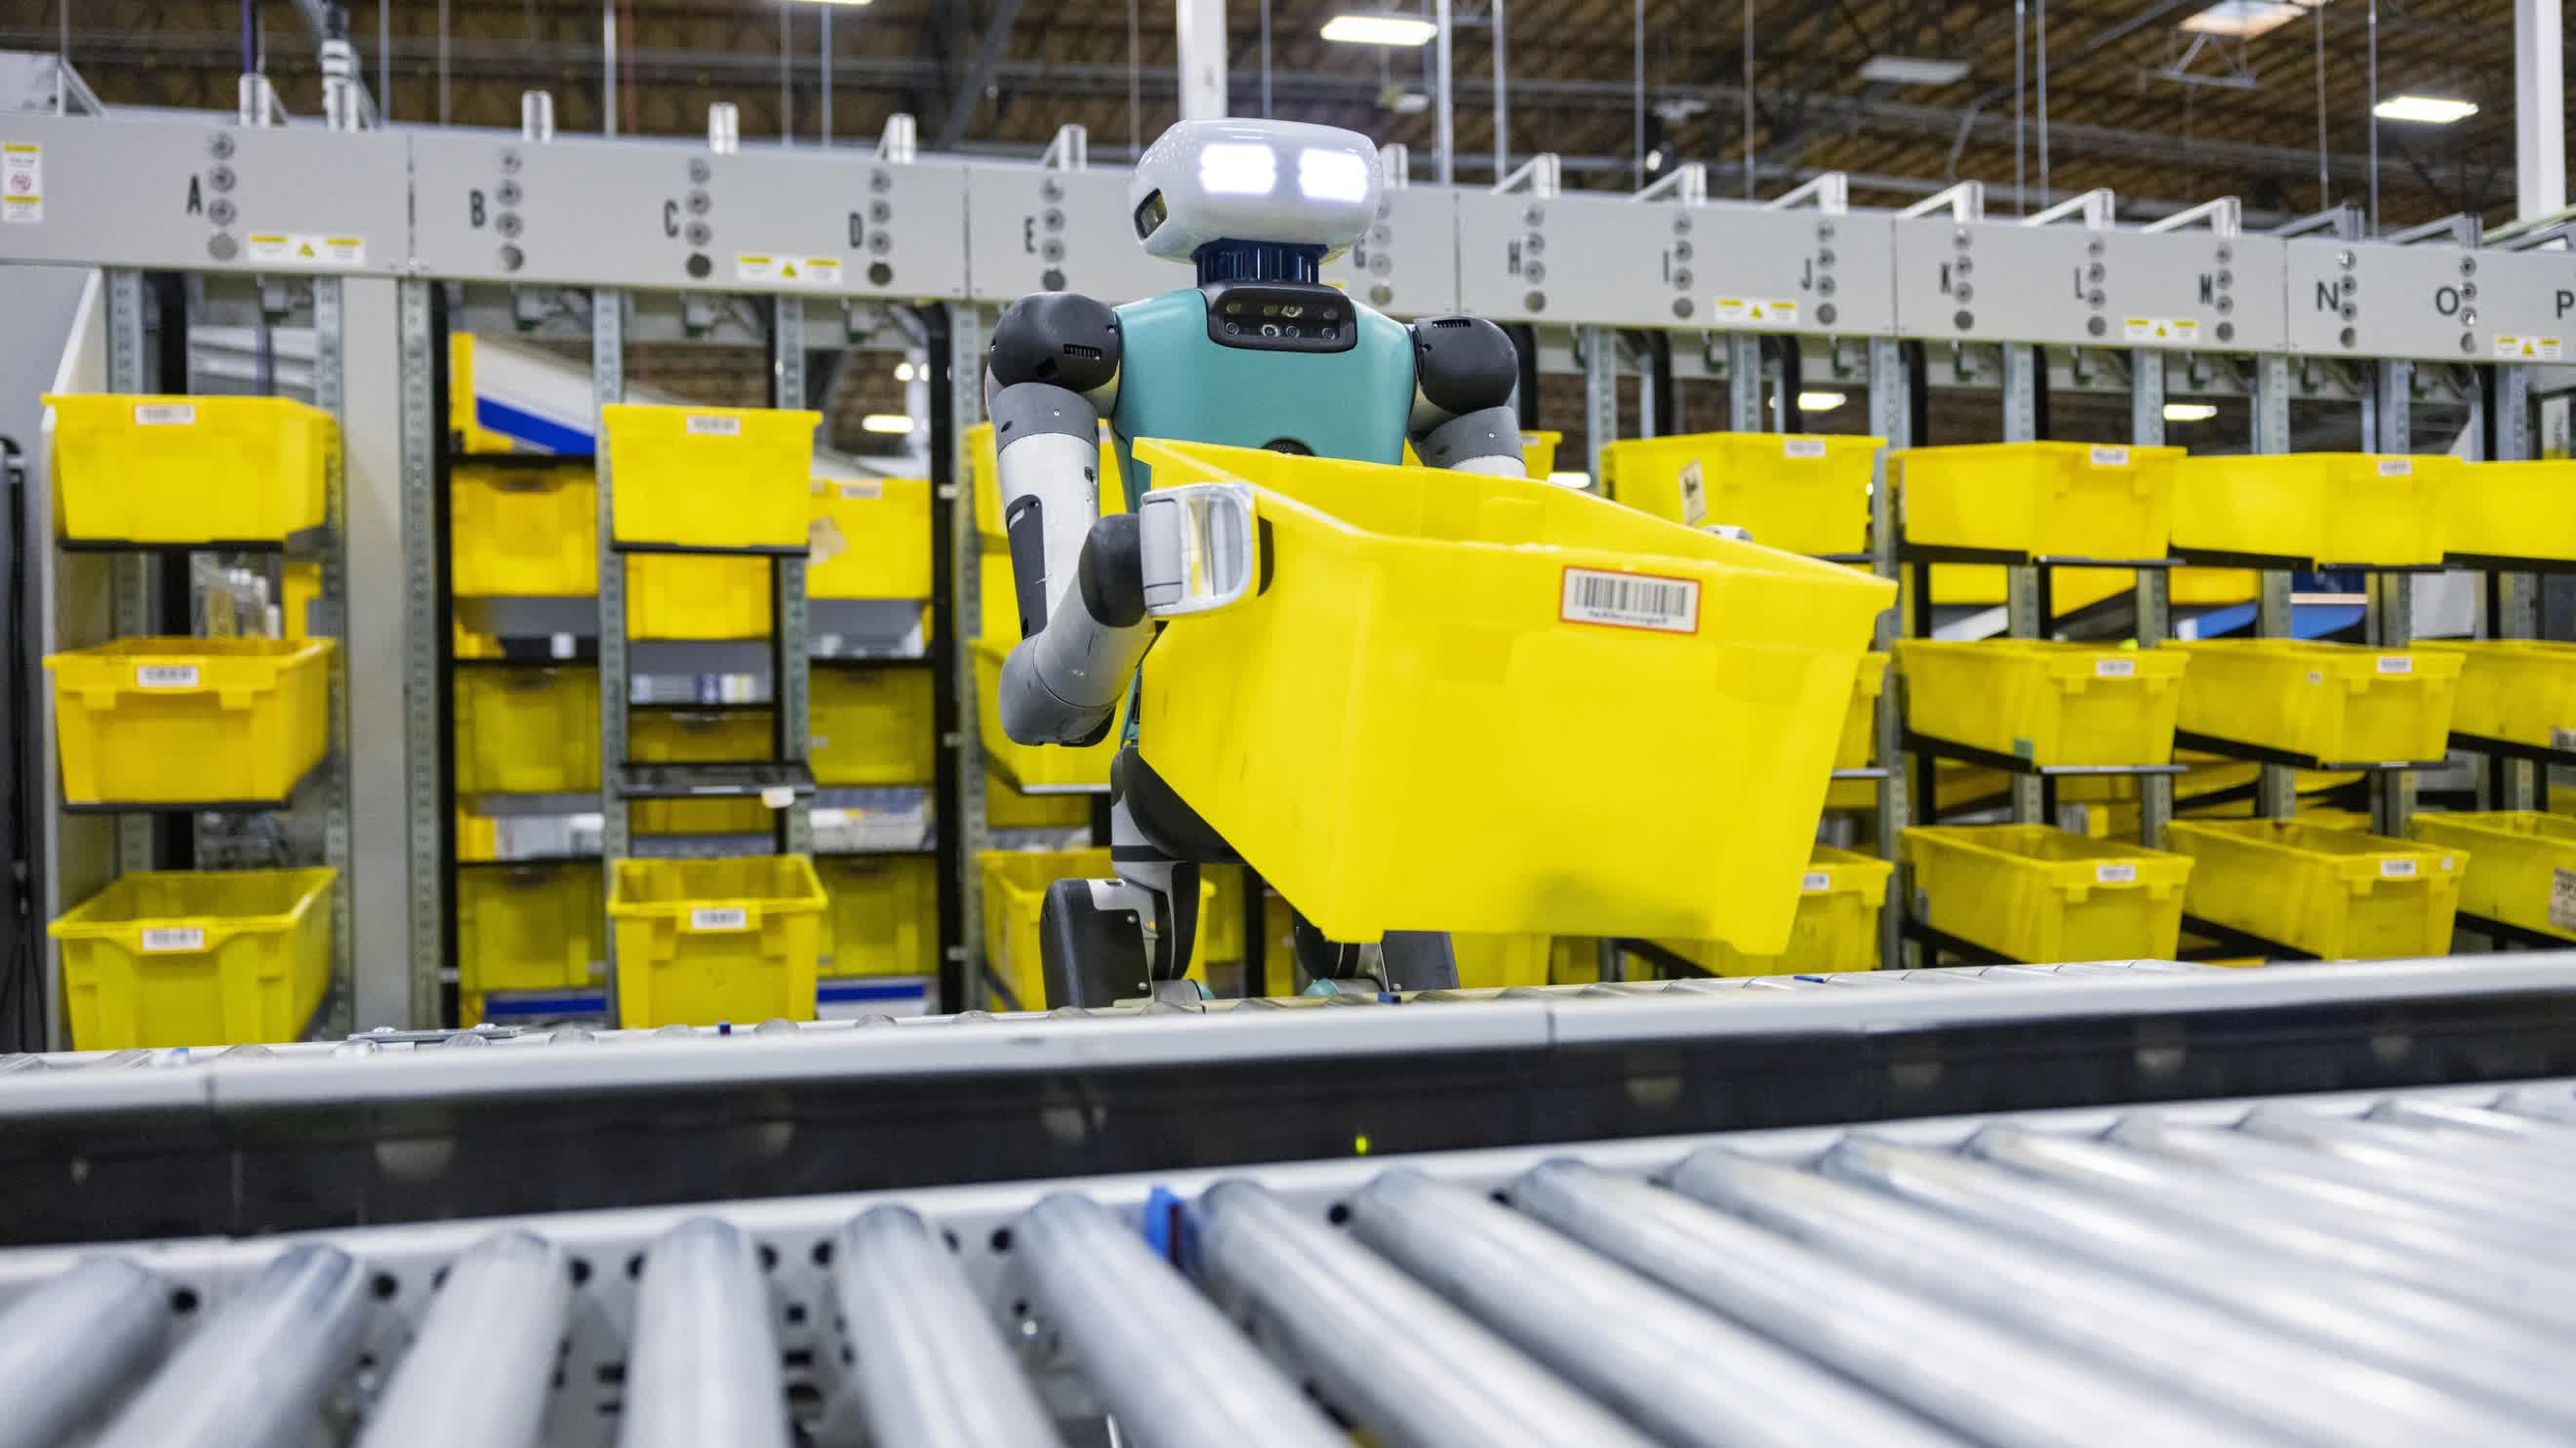 Amazon introduces humanoid robots to its warehouses, assures workers their jobs are safe